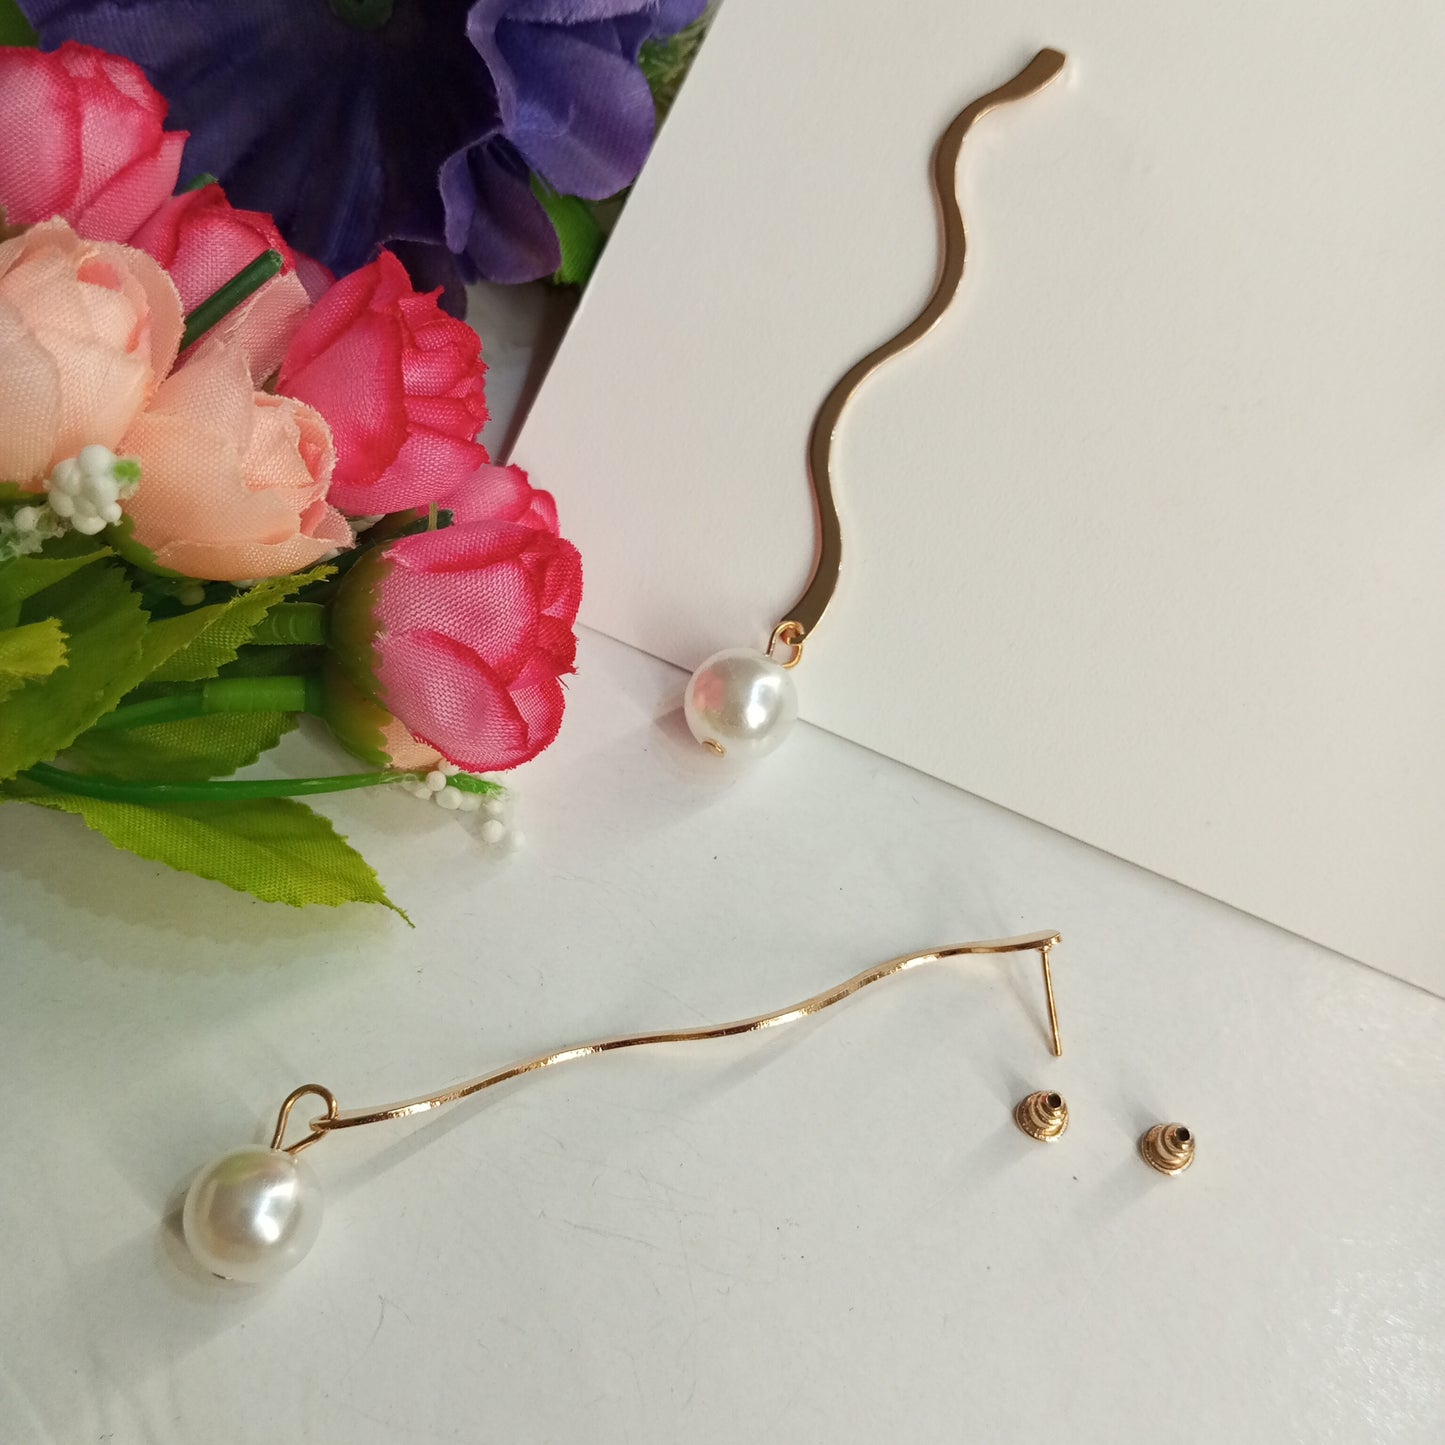 Golden Color Drop Earrings with Hanging Pearl